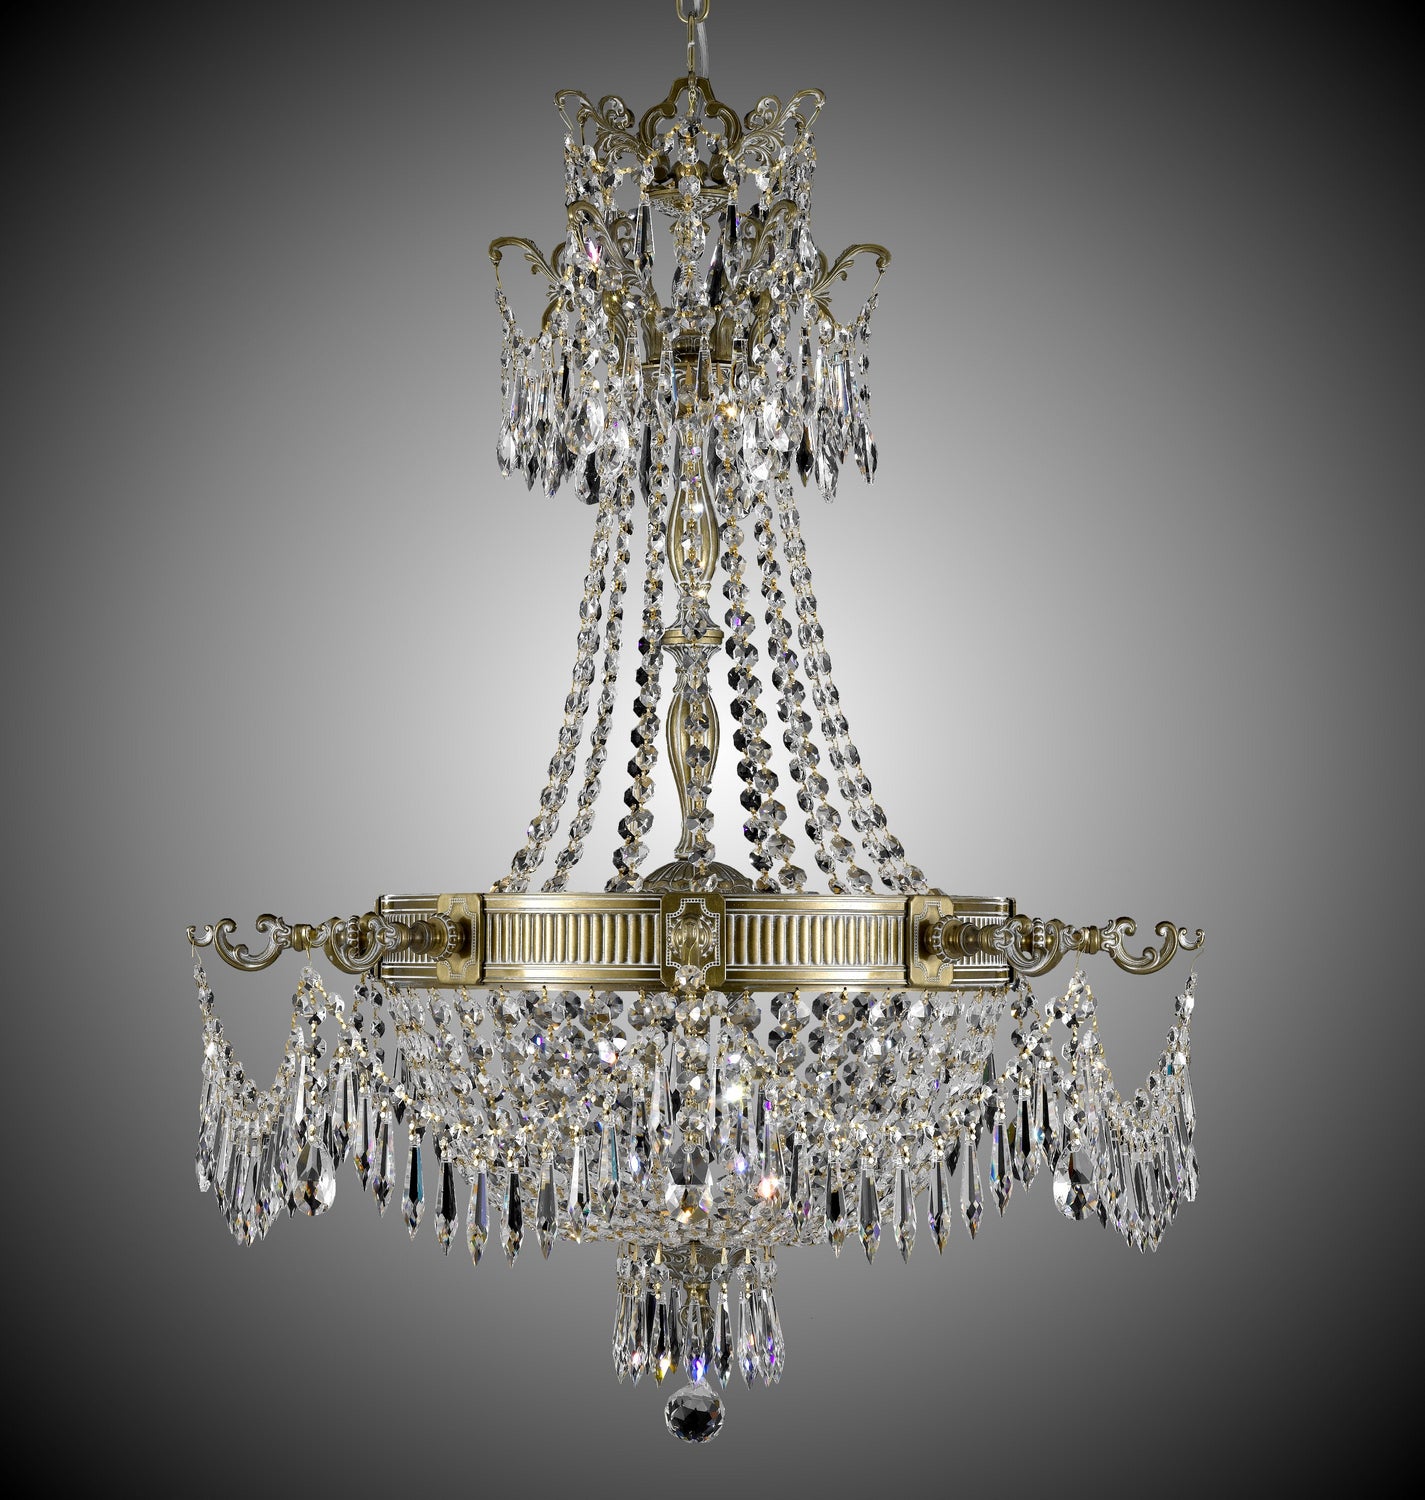 American Brass & Crystal Valencia CH8122-P-04G Chandelier Light - Antique White Glossy